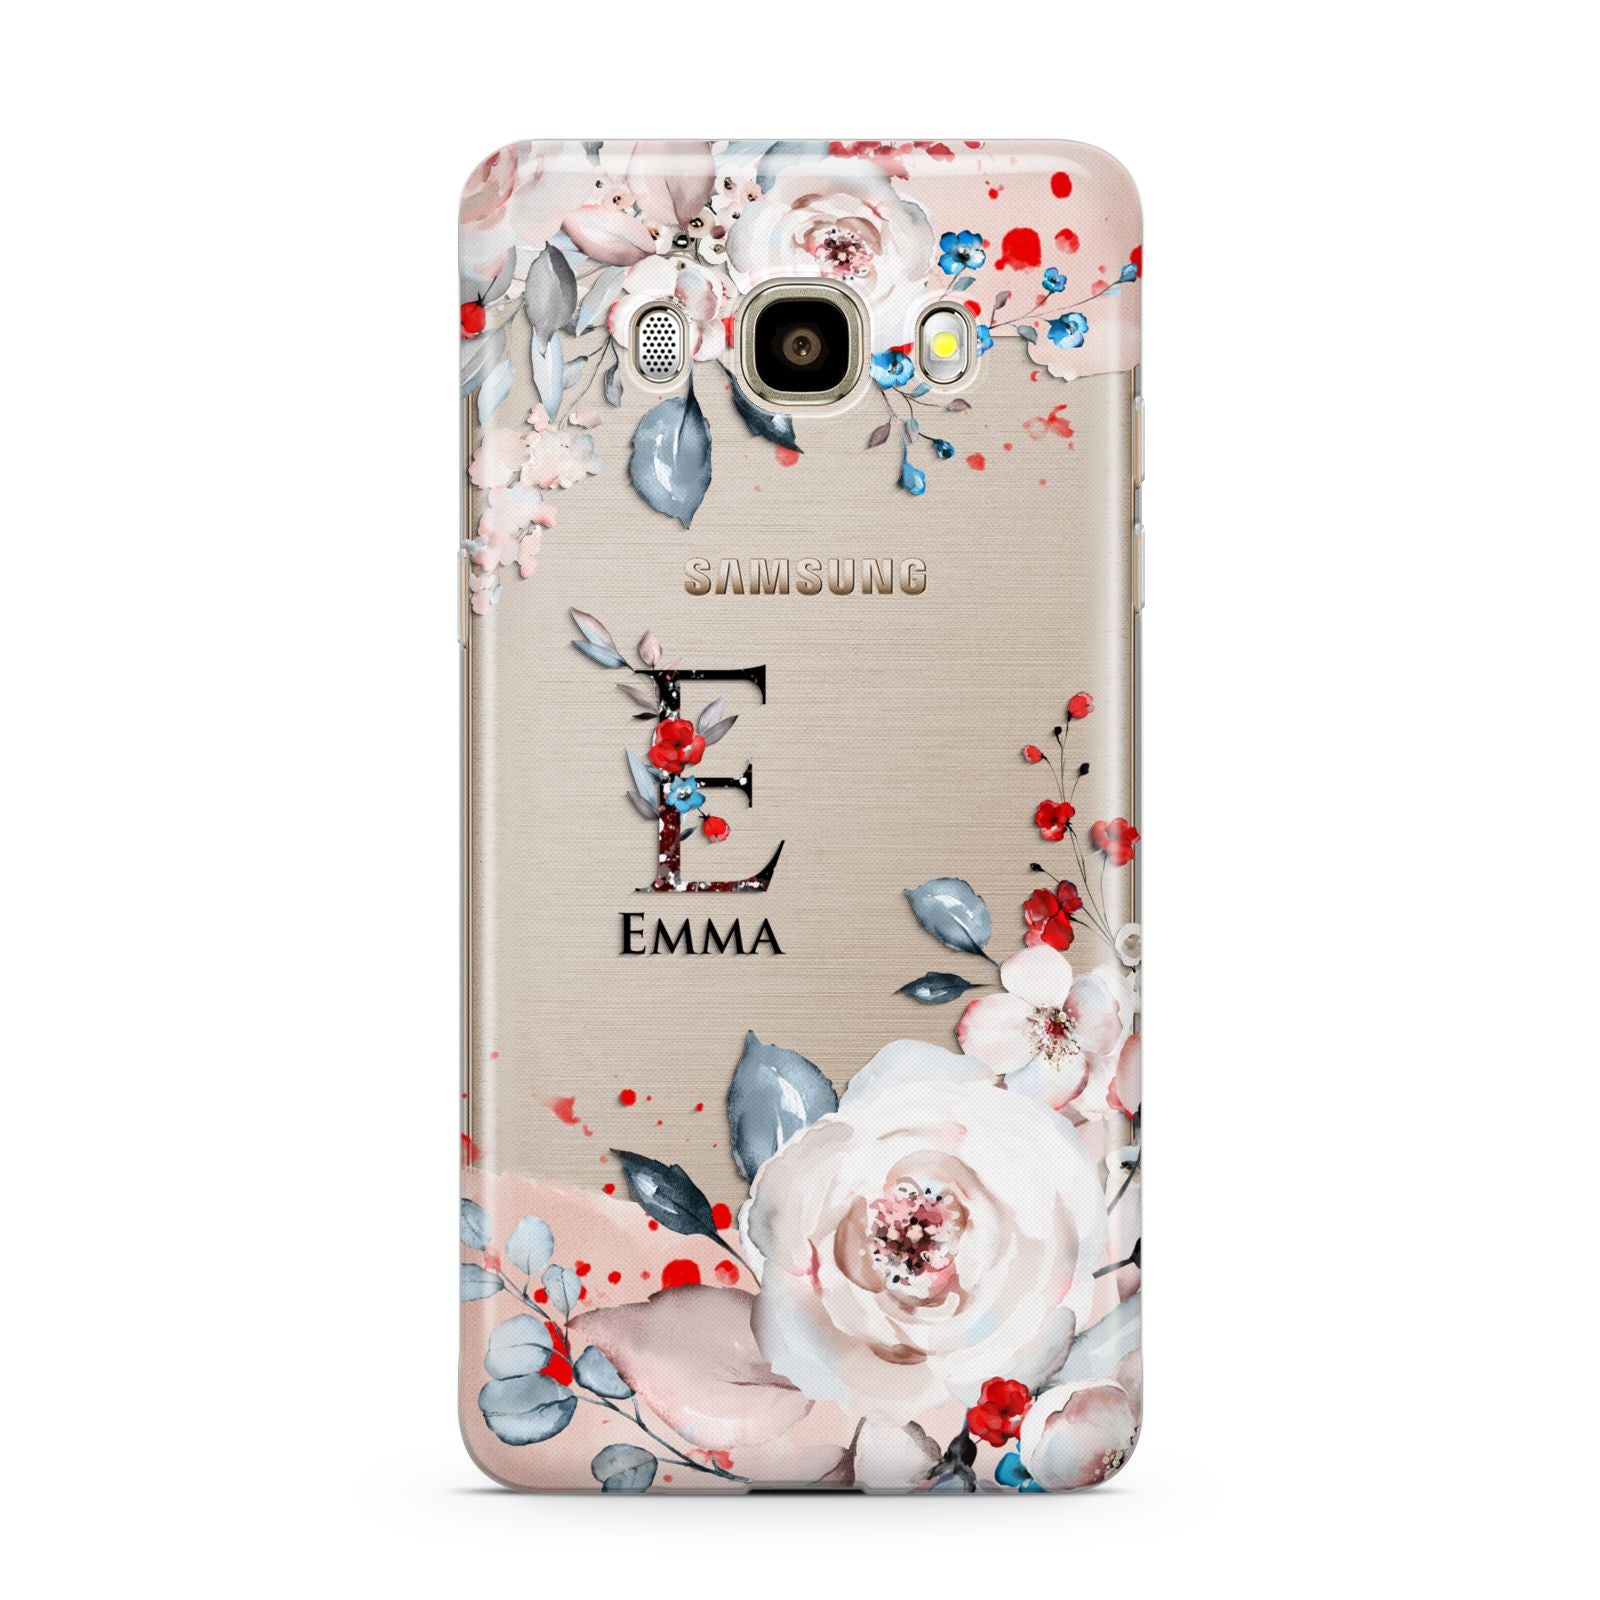 Monogrammed Roses Floral Wreath Samsung Galaxy J7 2016 Case on gold phone